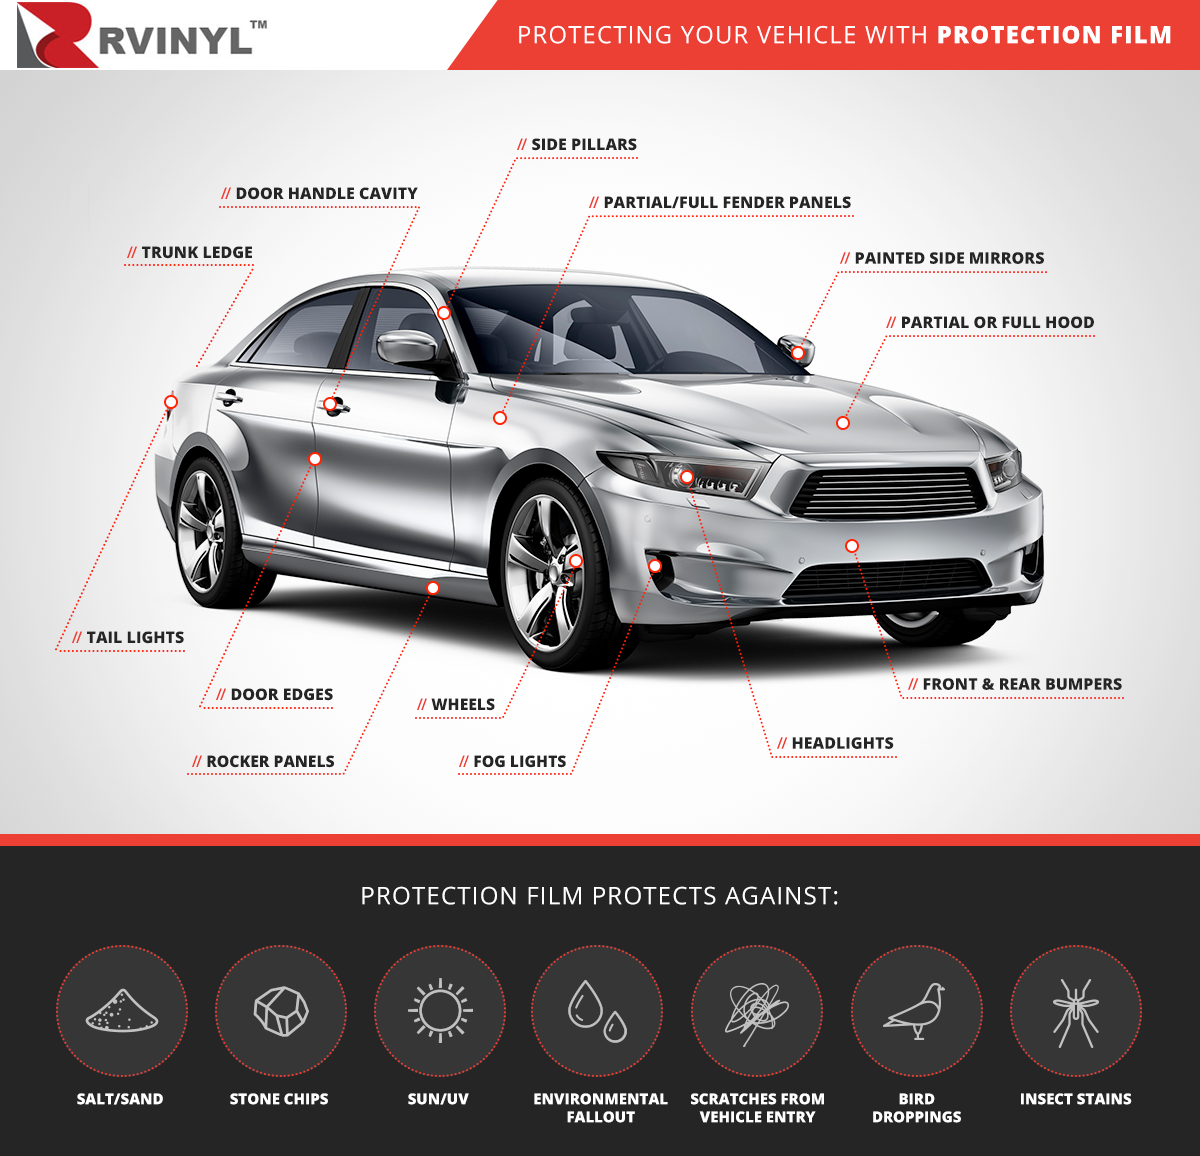 WhatCan You Protect with Paint Protection Film